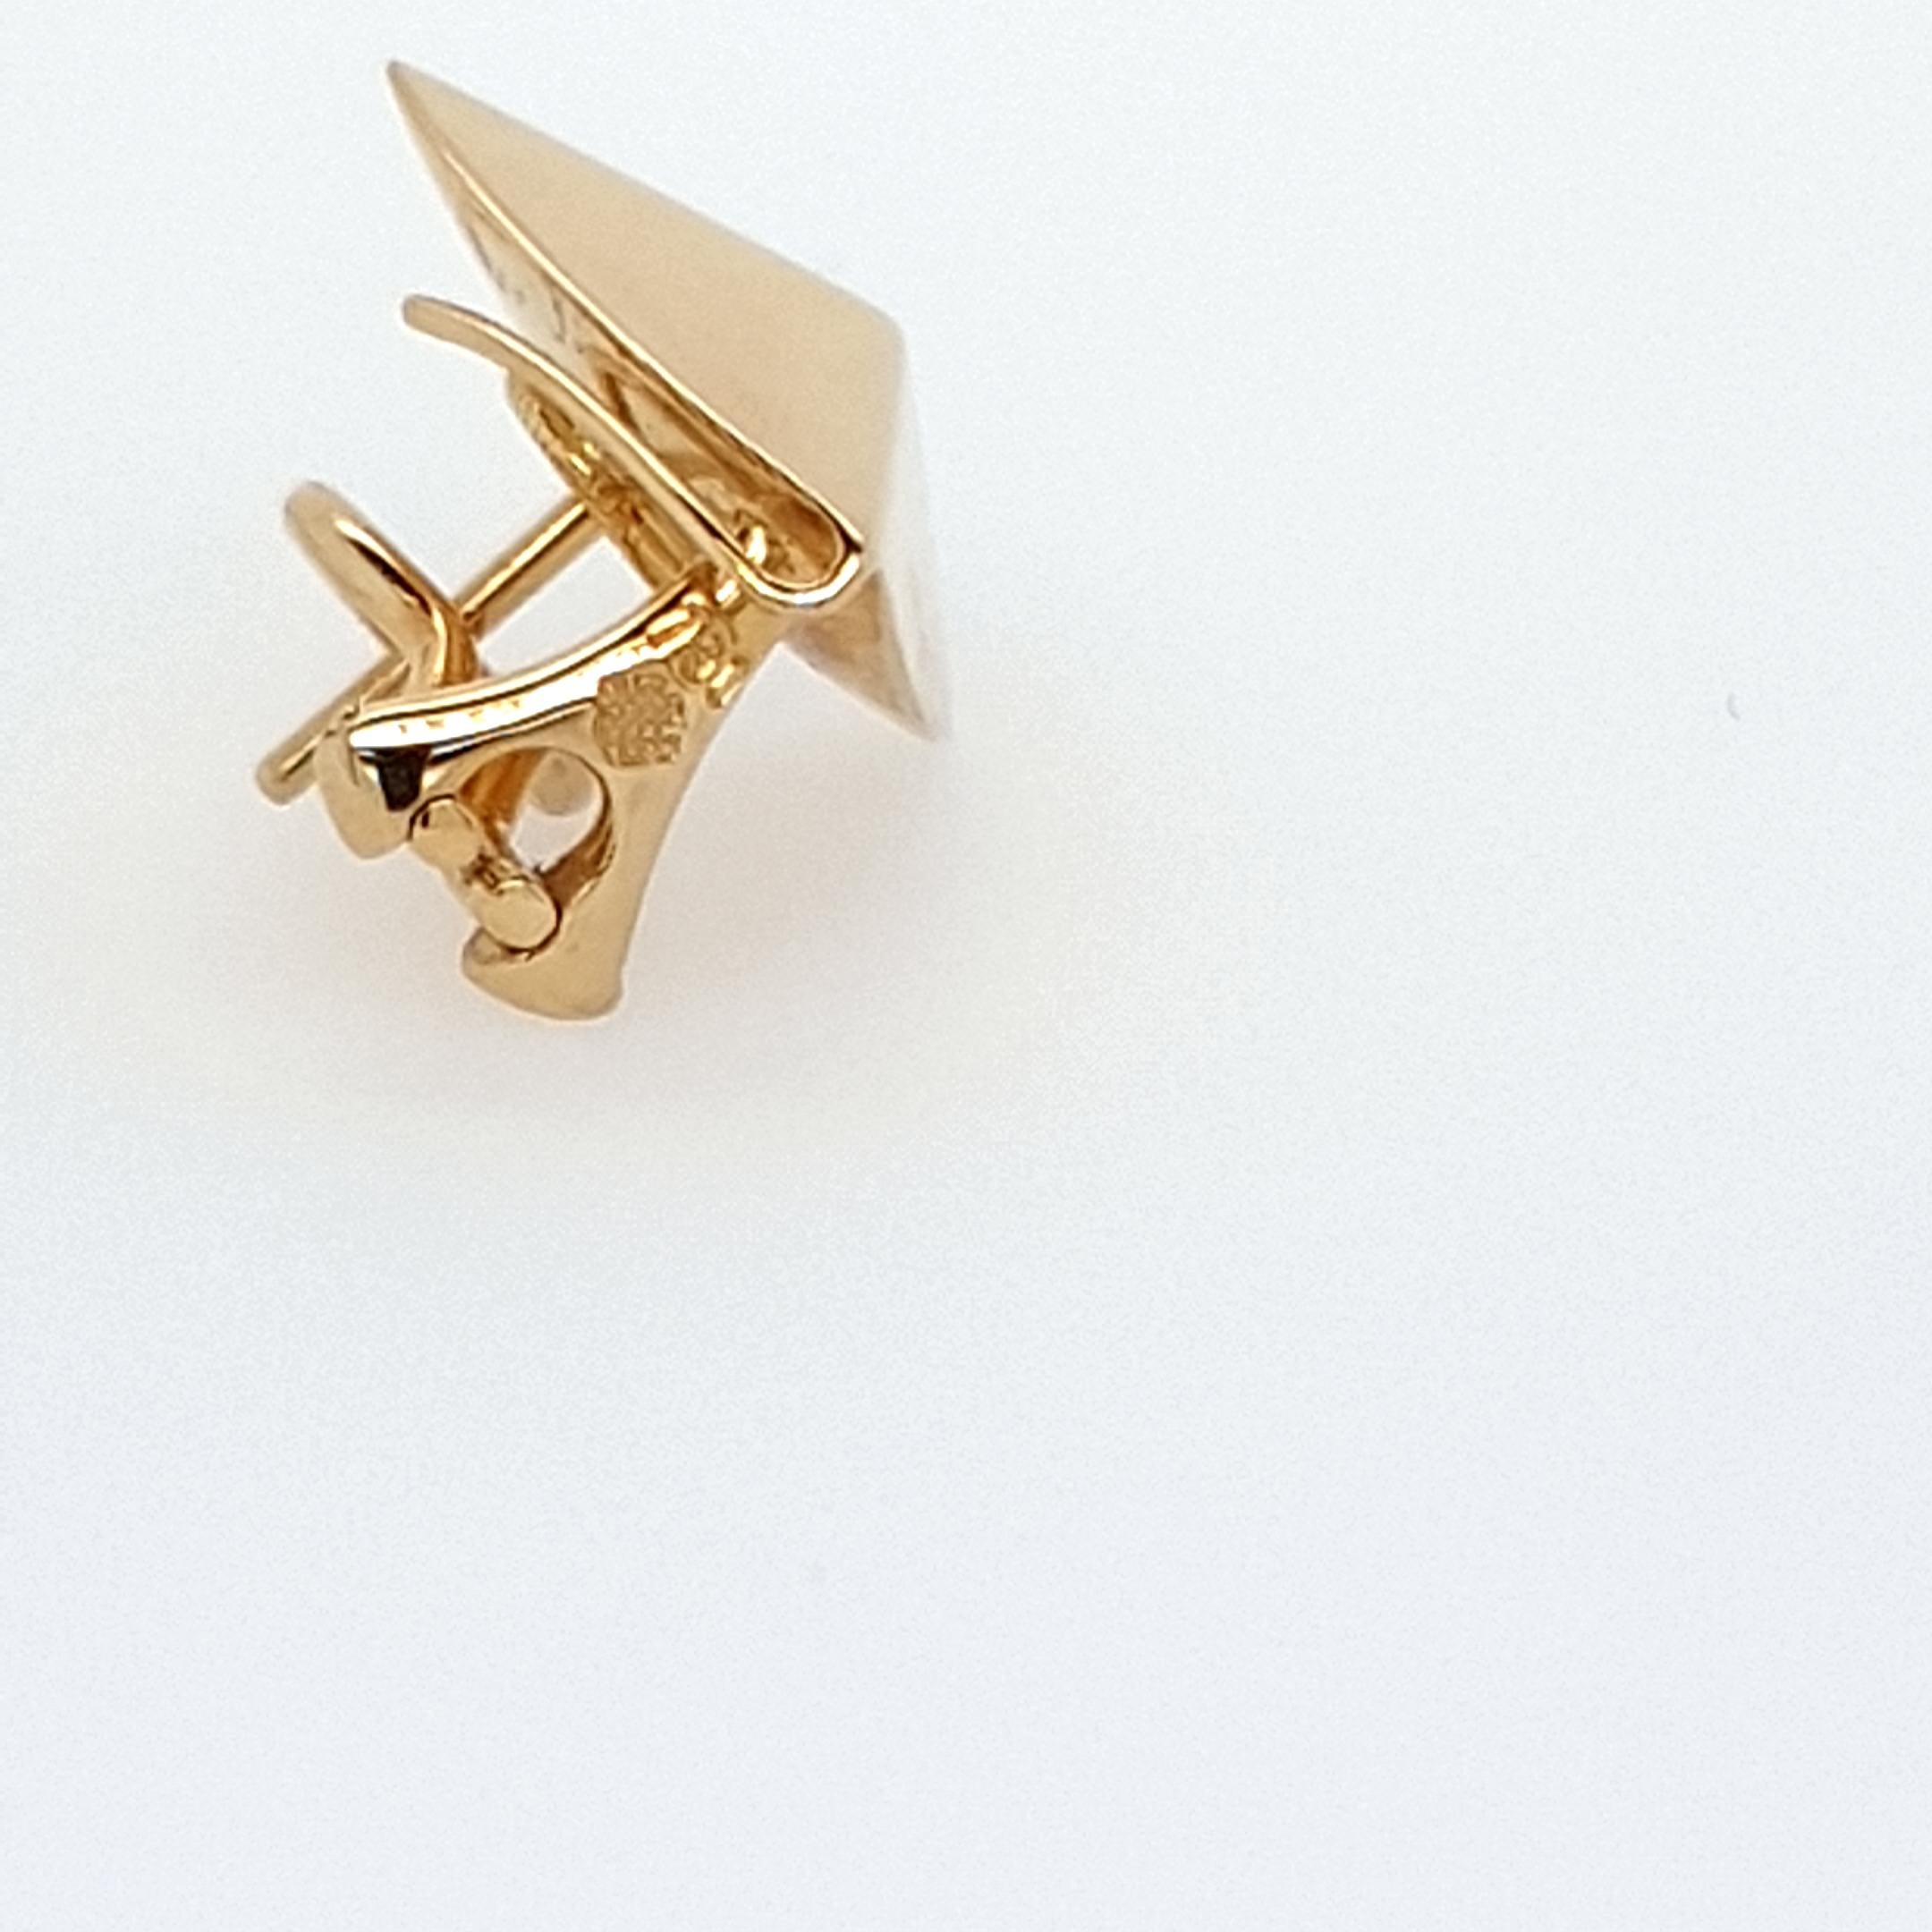 gold pins that fold back